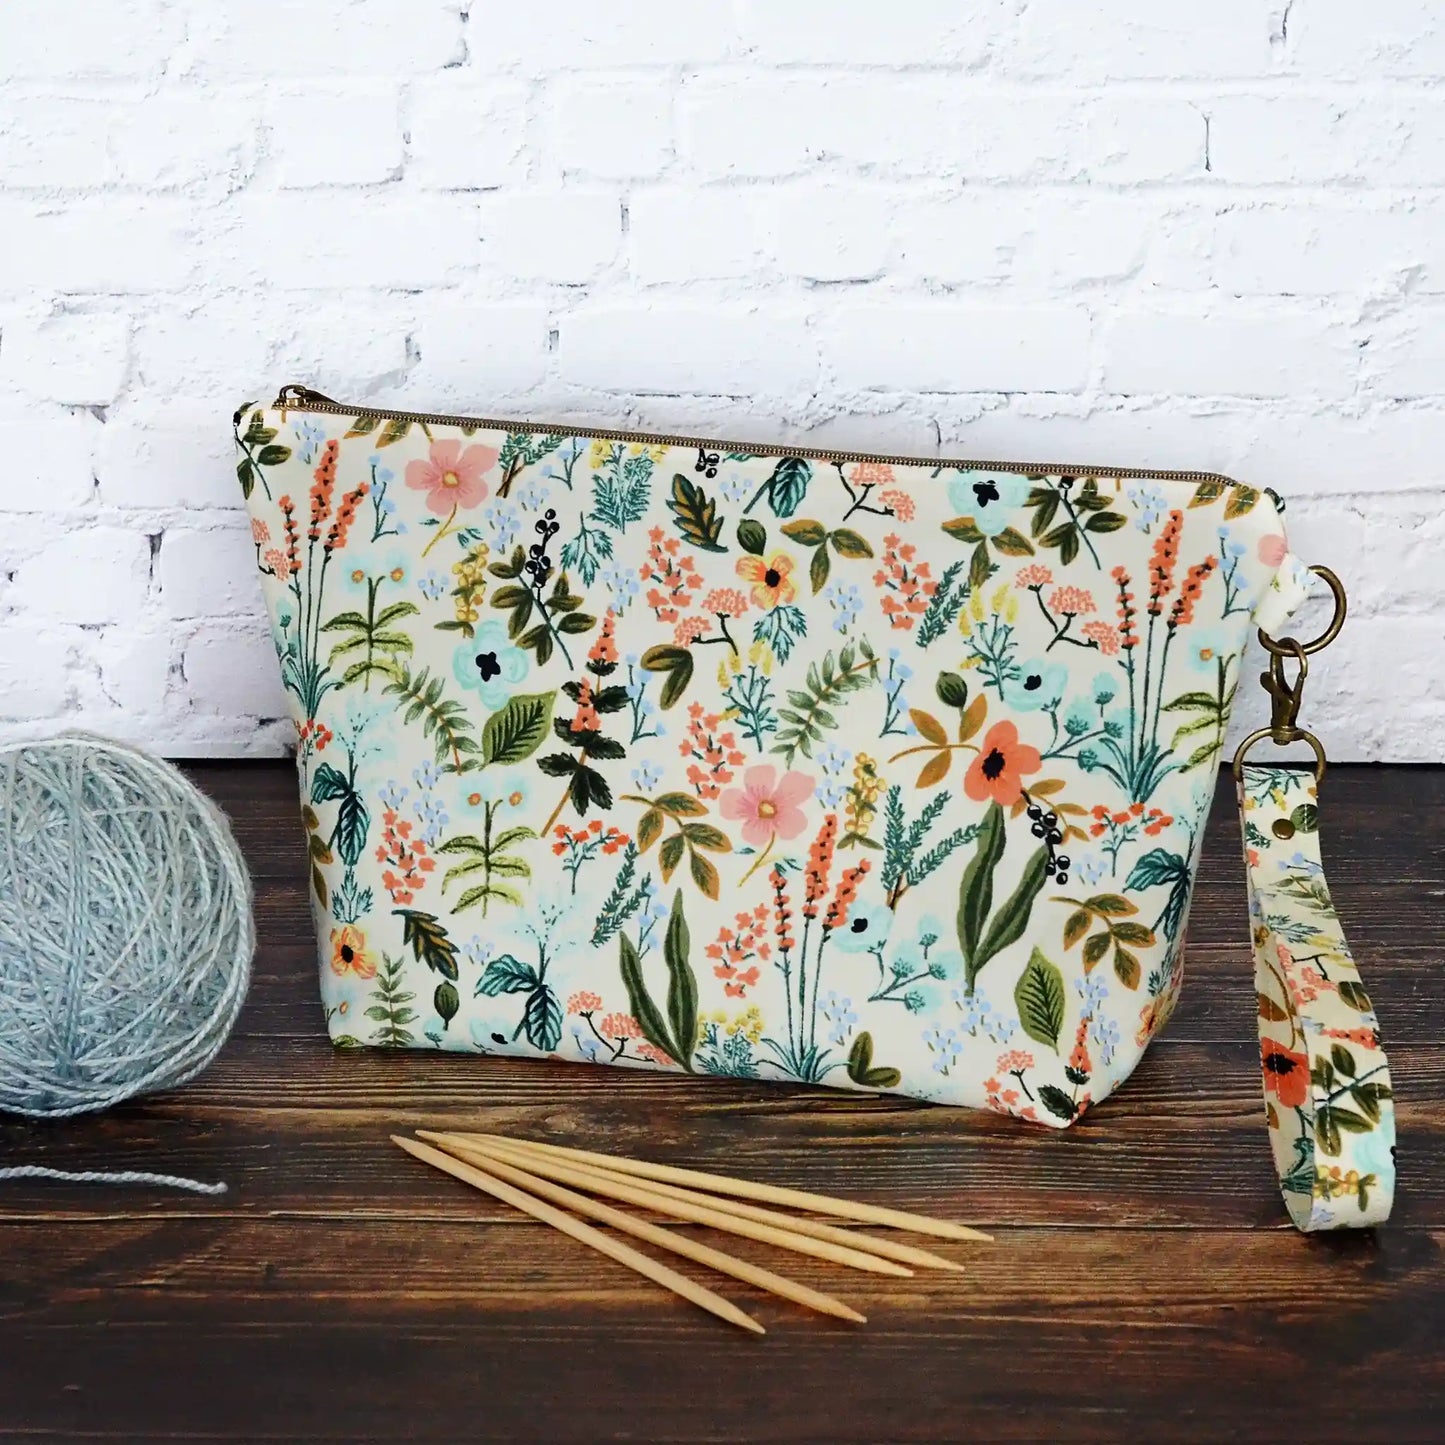 Small Project Bag in Amalfi Herb Garden Fabric from Rifle Paper